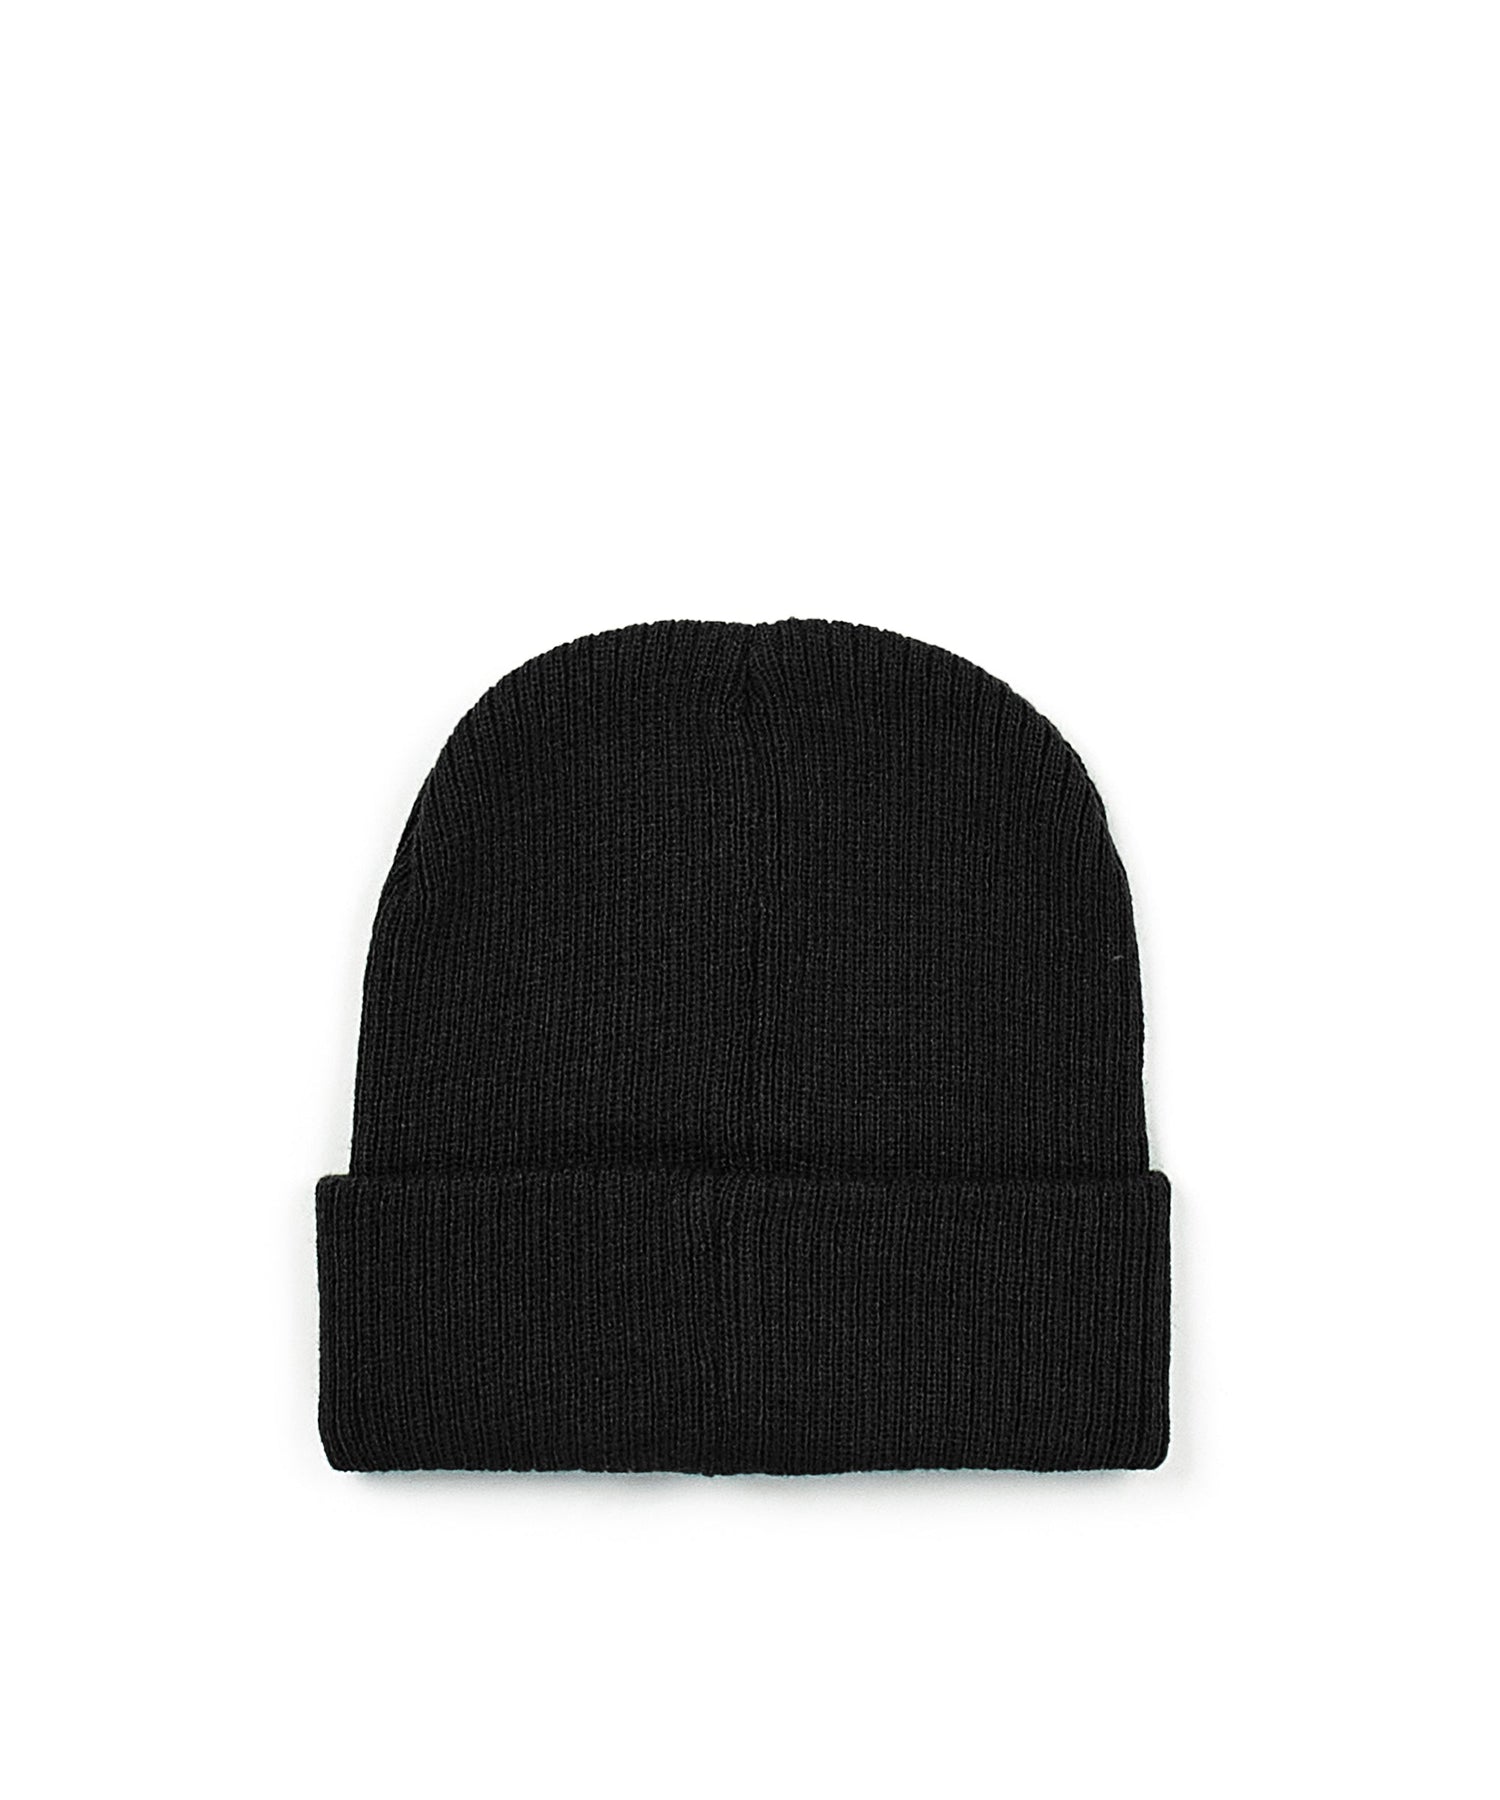 Reason Clothing | Shop Accessories: Hats, Bags, Footwear & More – Page 2